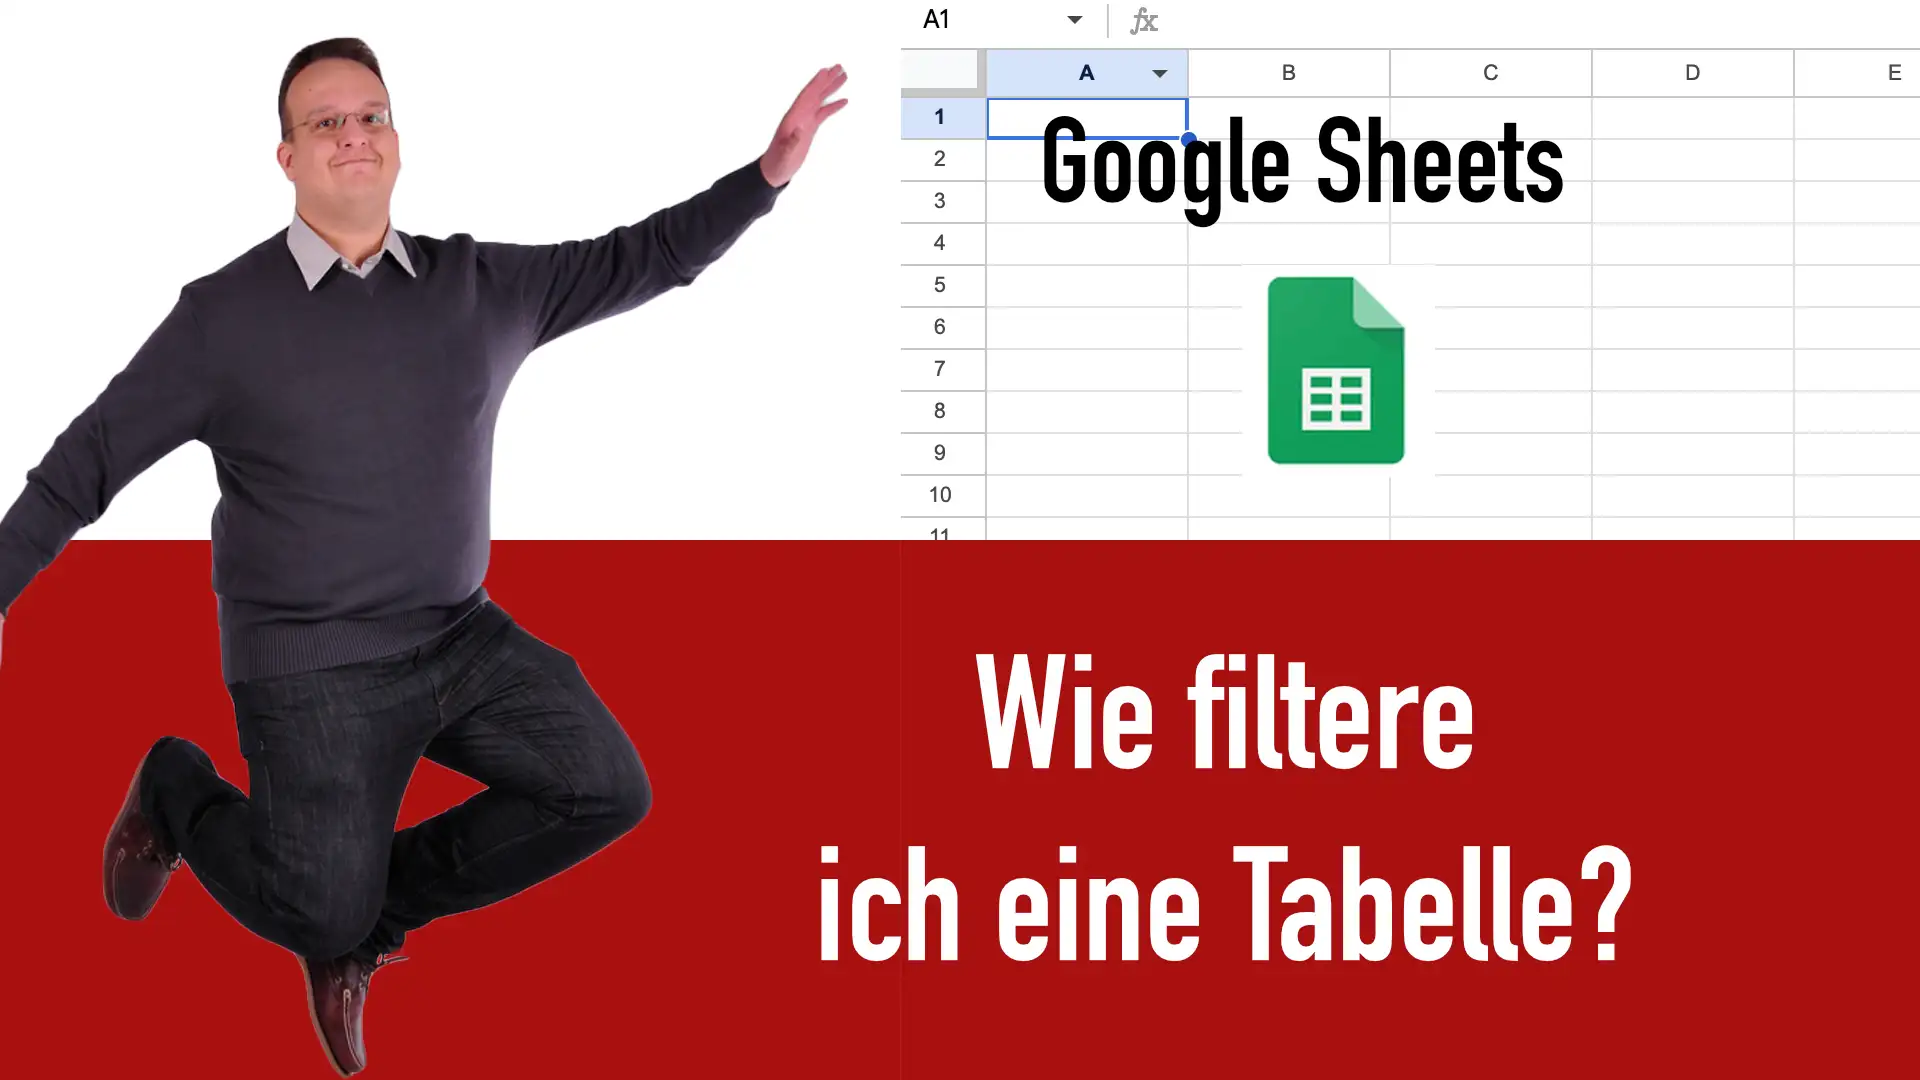 Tabelle filtern – Google Tabelle / Sheets Anleitung